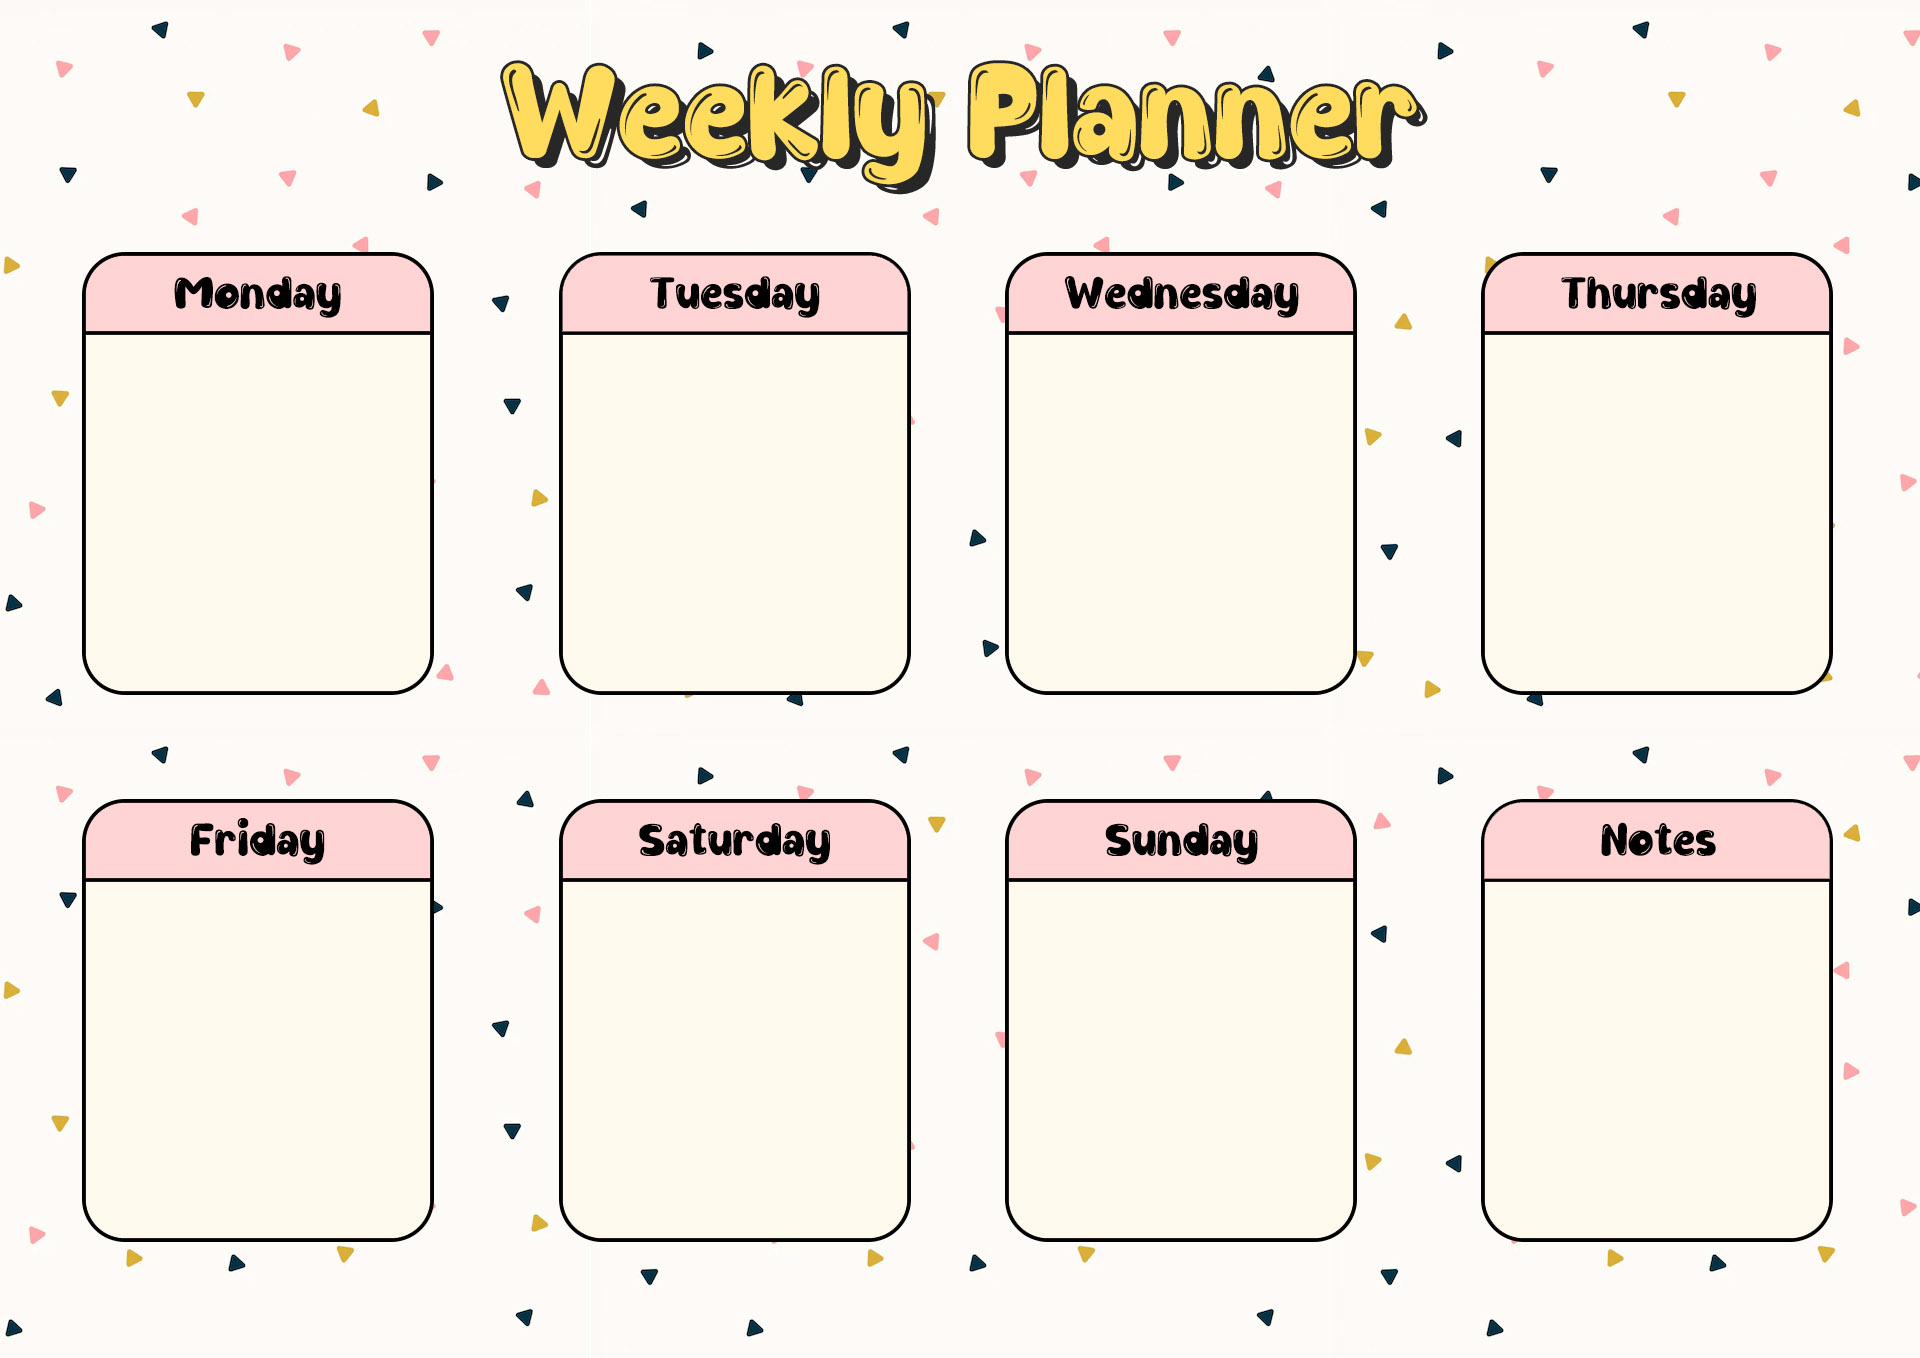 5 Day Weekly Planner Template Landscape Image